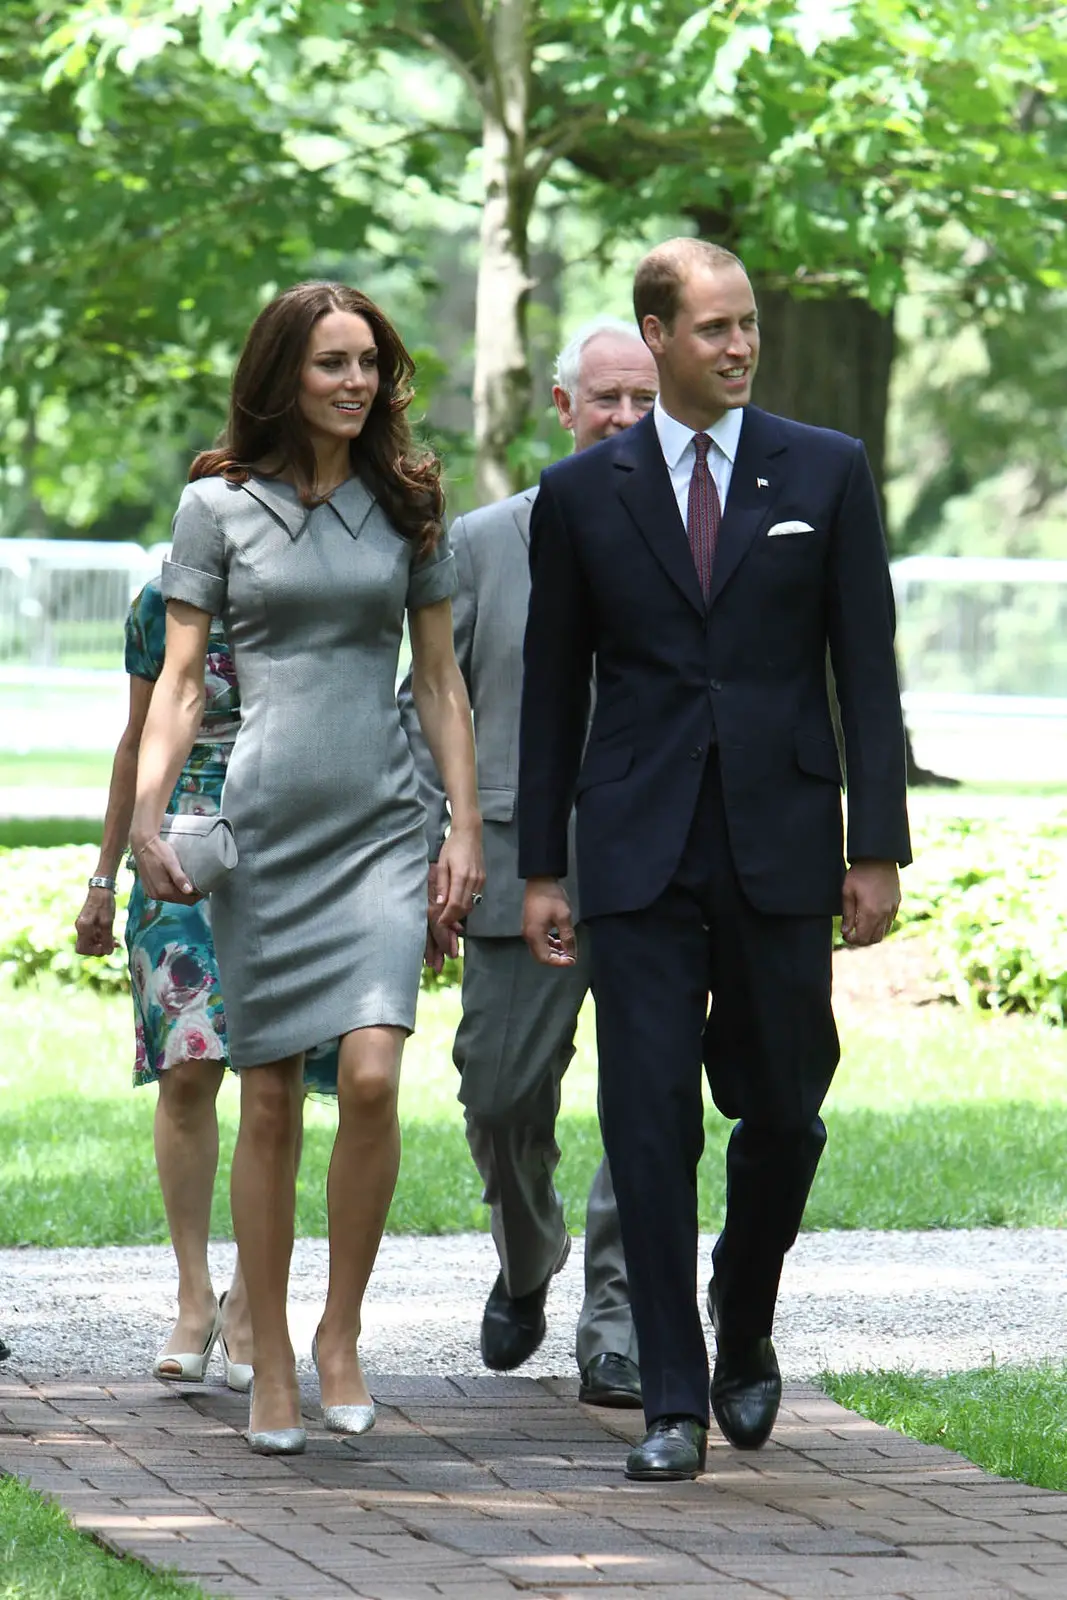 The Duchess of Cambridge in Catherine Walker Kensington Dress to plante tree at Rideau Hall during canada tour in 2011